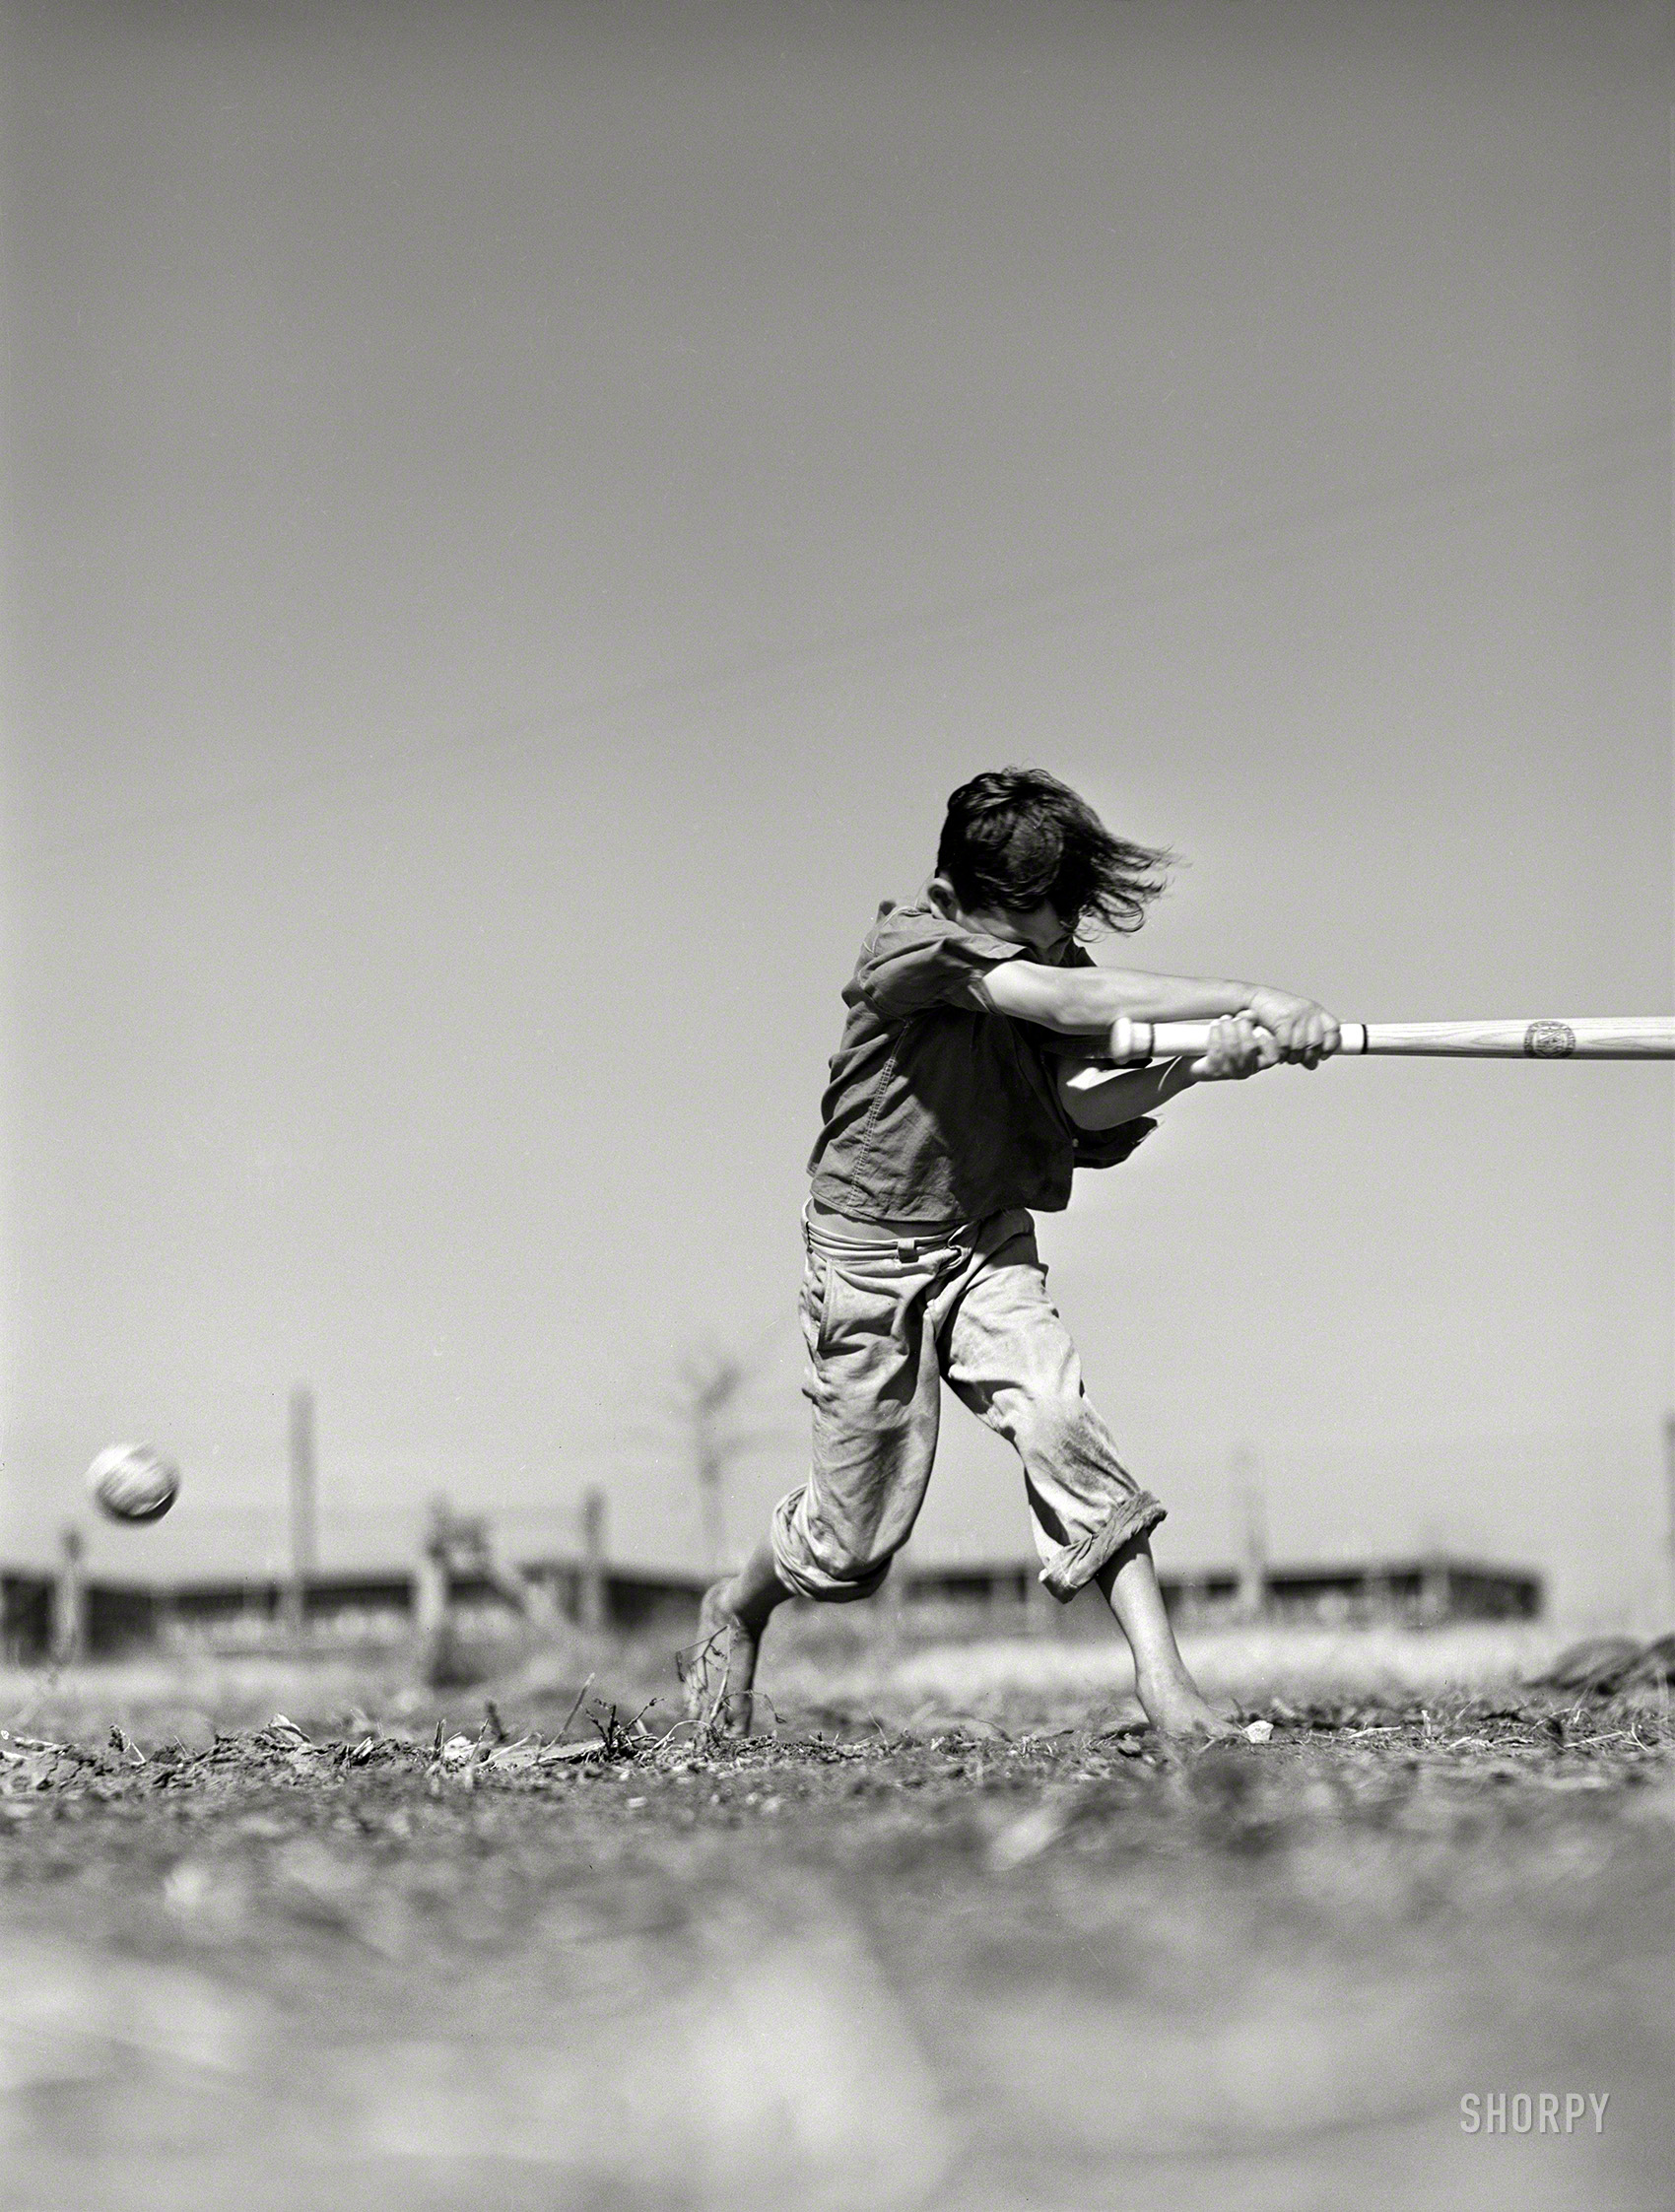 January 1942. "Saturday morning baseball game. Farm Security Administration camp in Robstown, Texas." Photo by Arthur Rothstein. View full size.